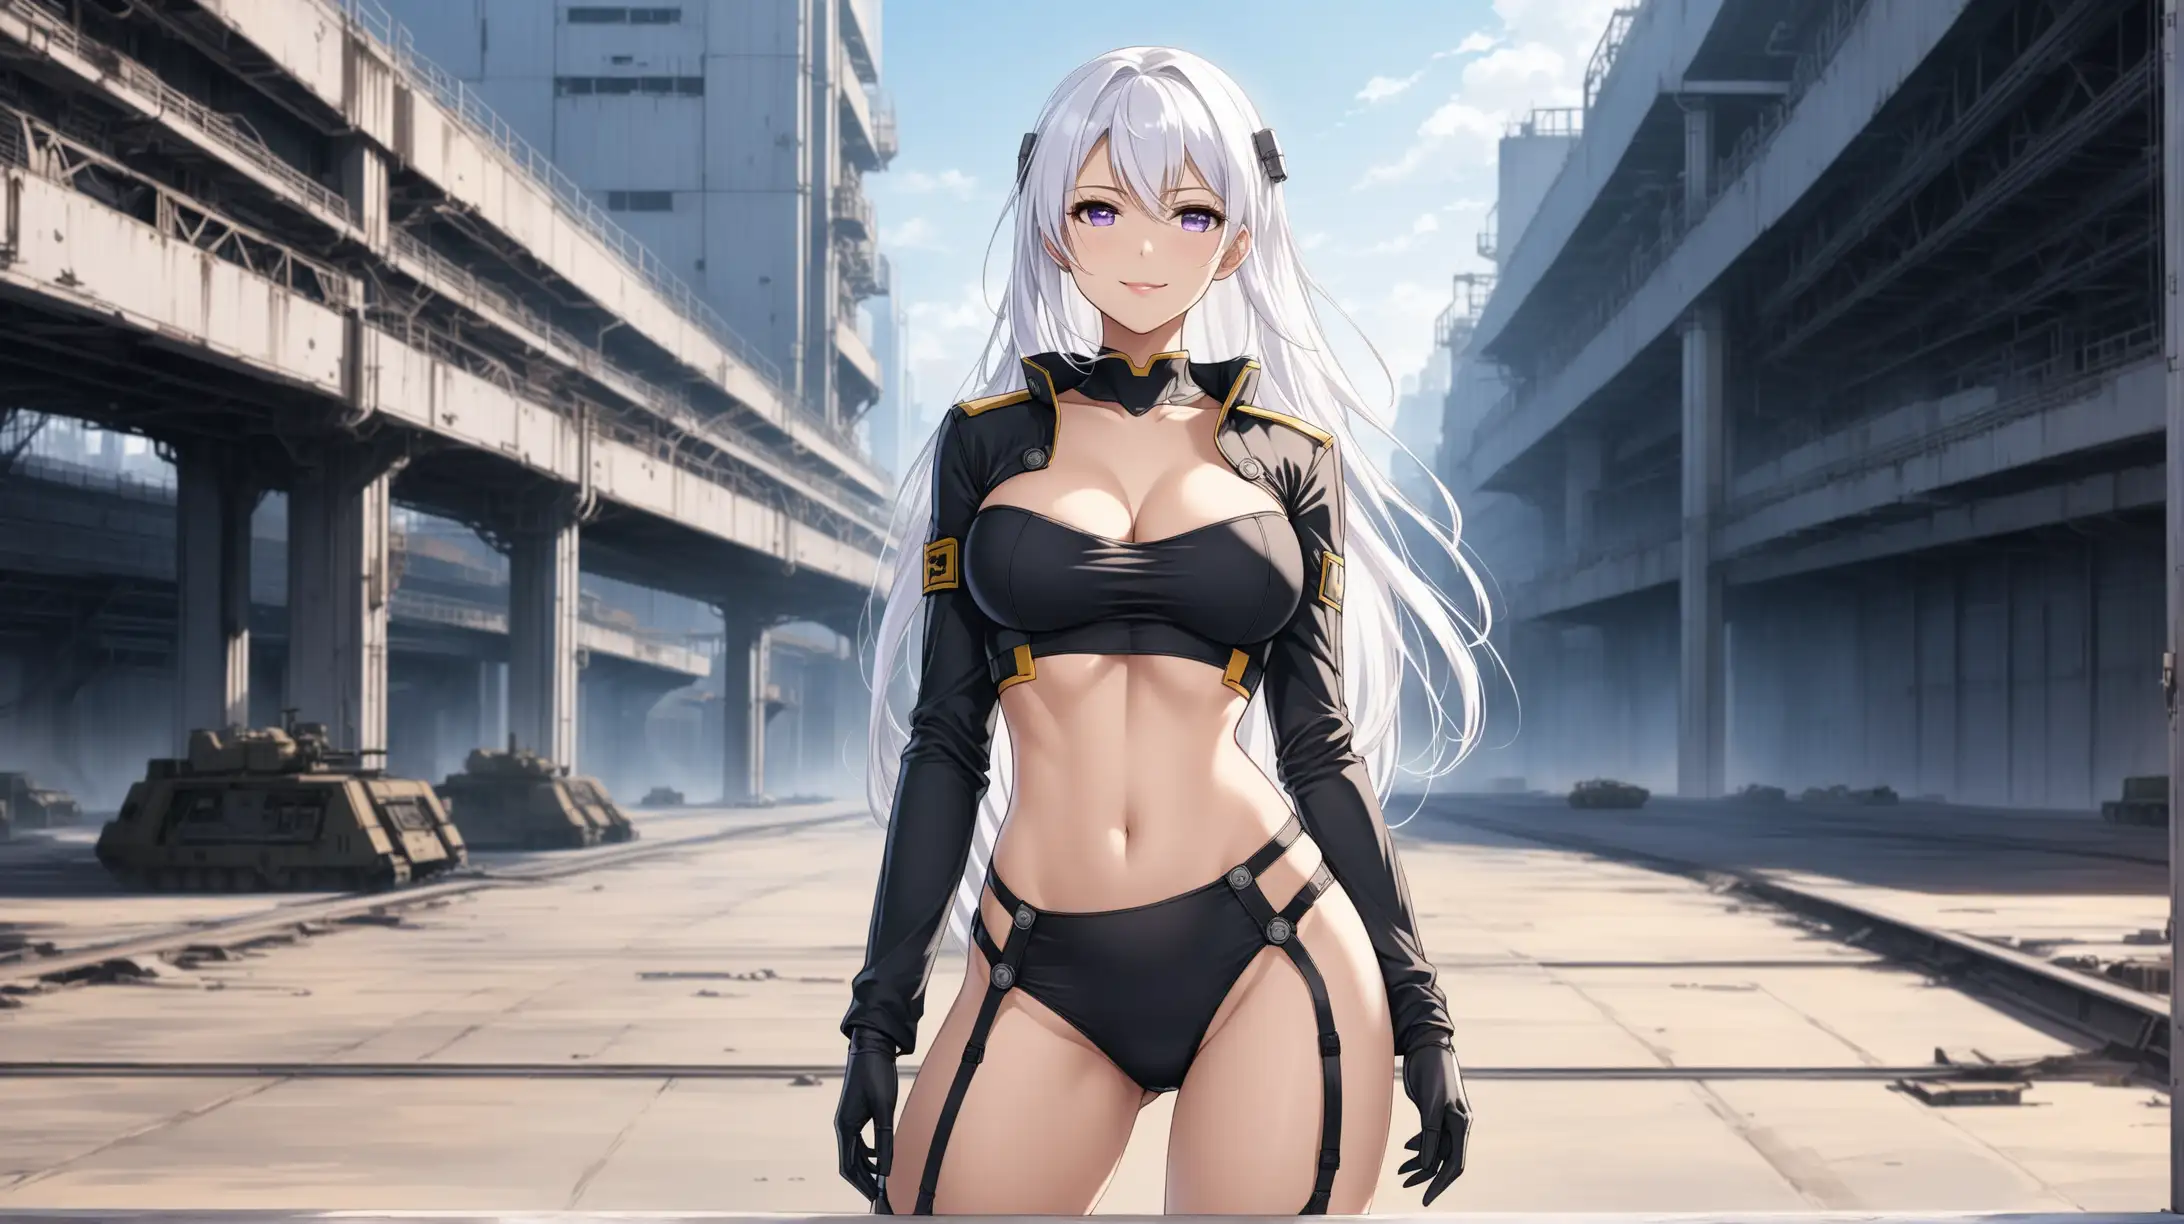 Azur Lane Character Enterprise in FalloutInspired Outfit Outdoors